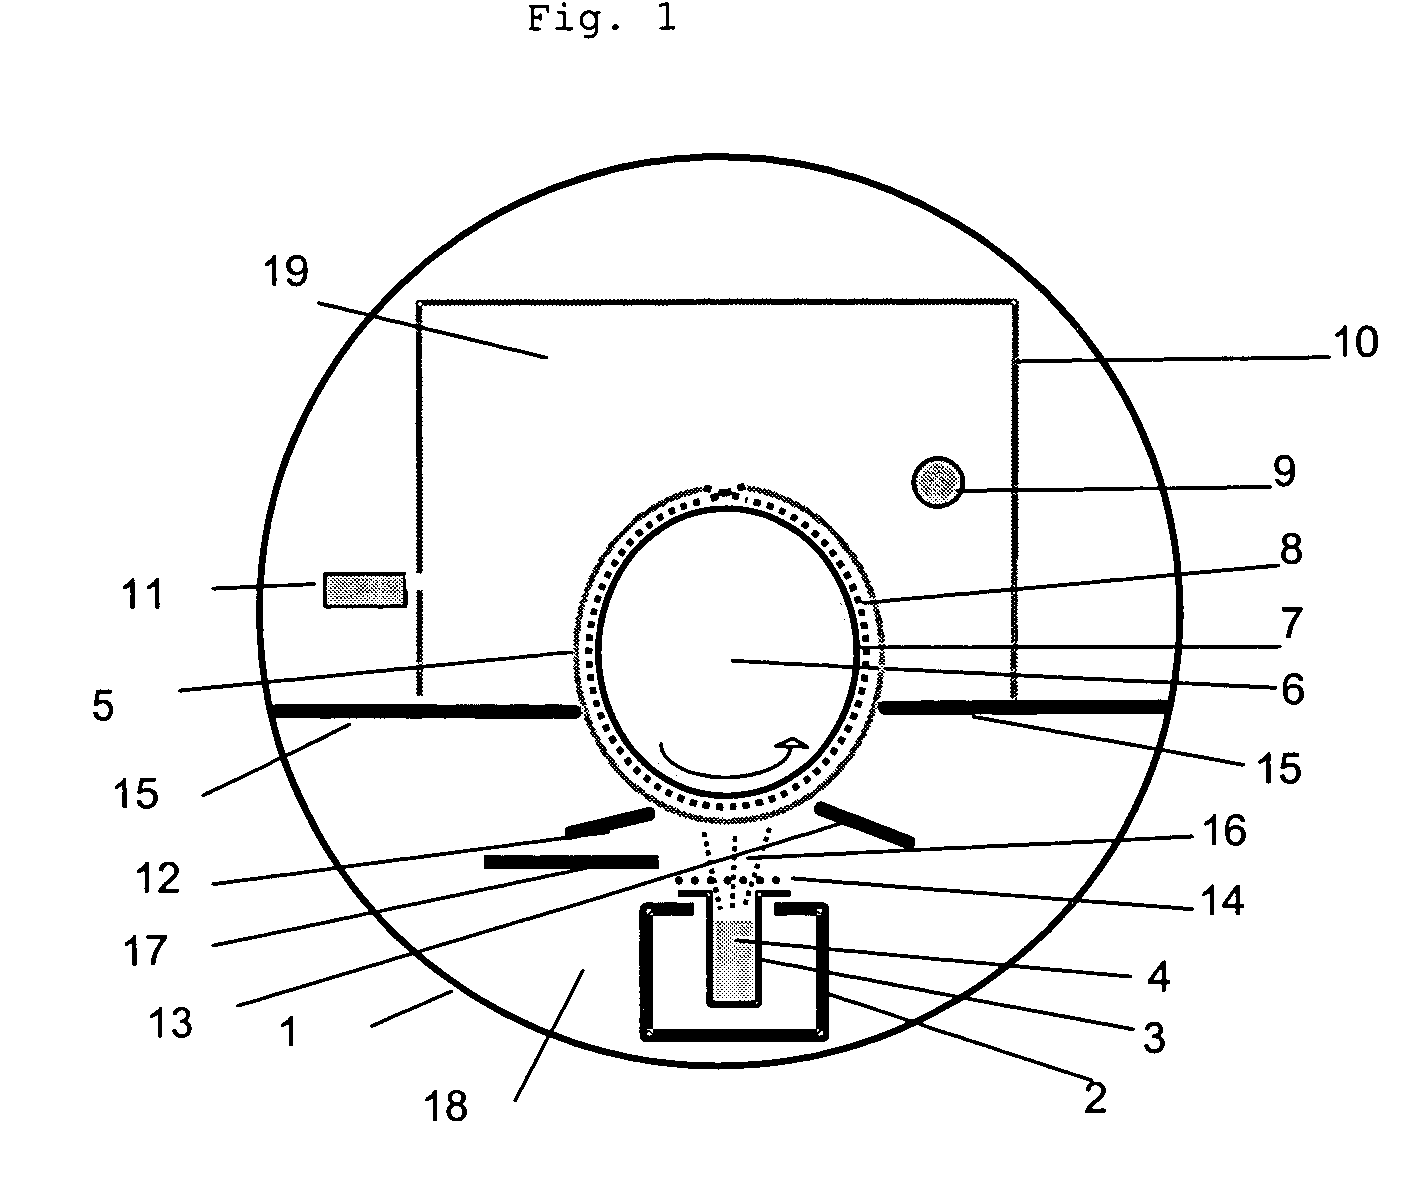 Manufacturing method of phosphor or scintillator sheets and panels suitable for use in a scanning apparatus